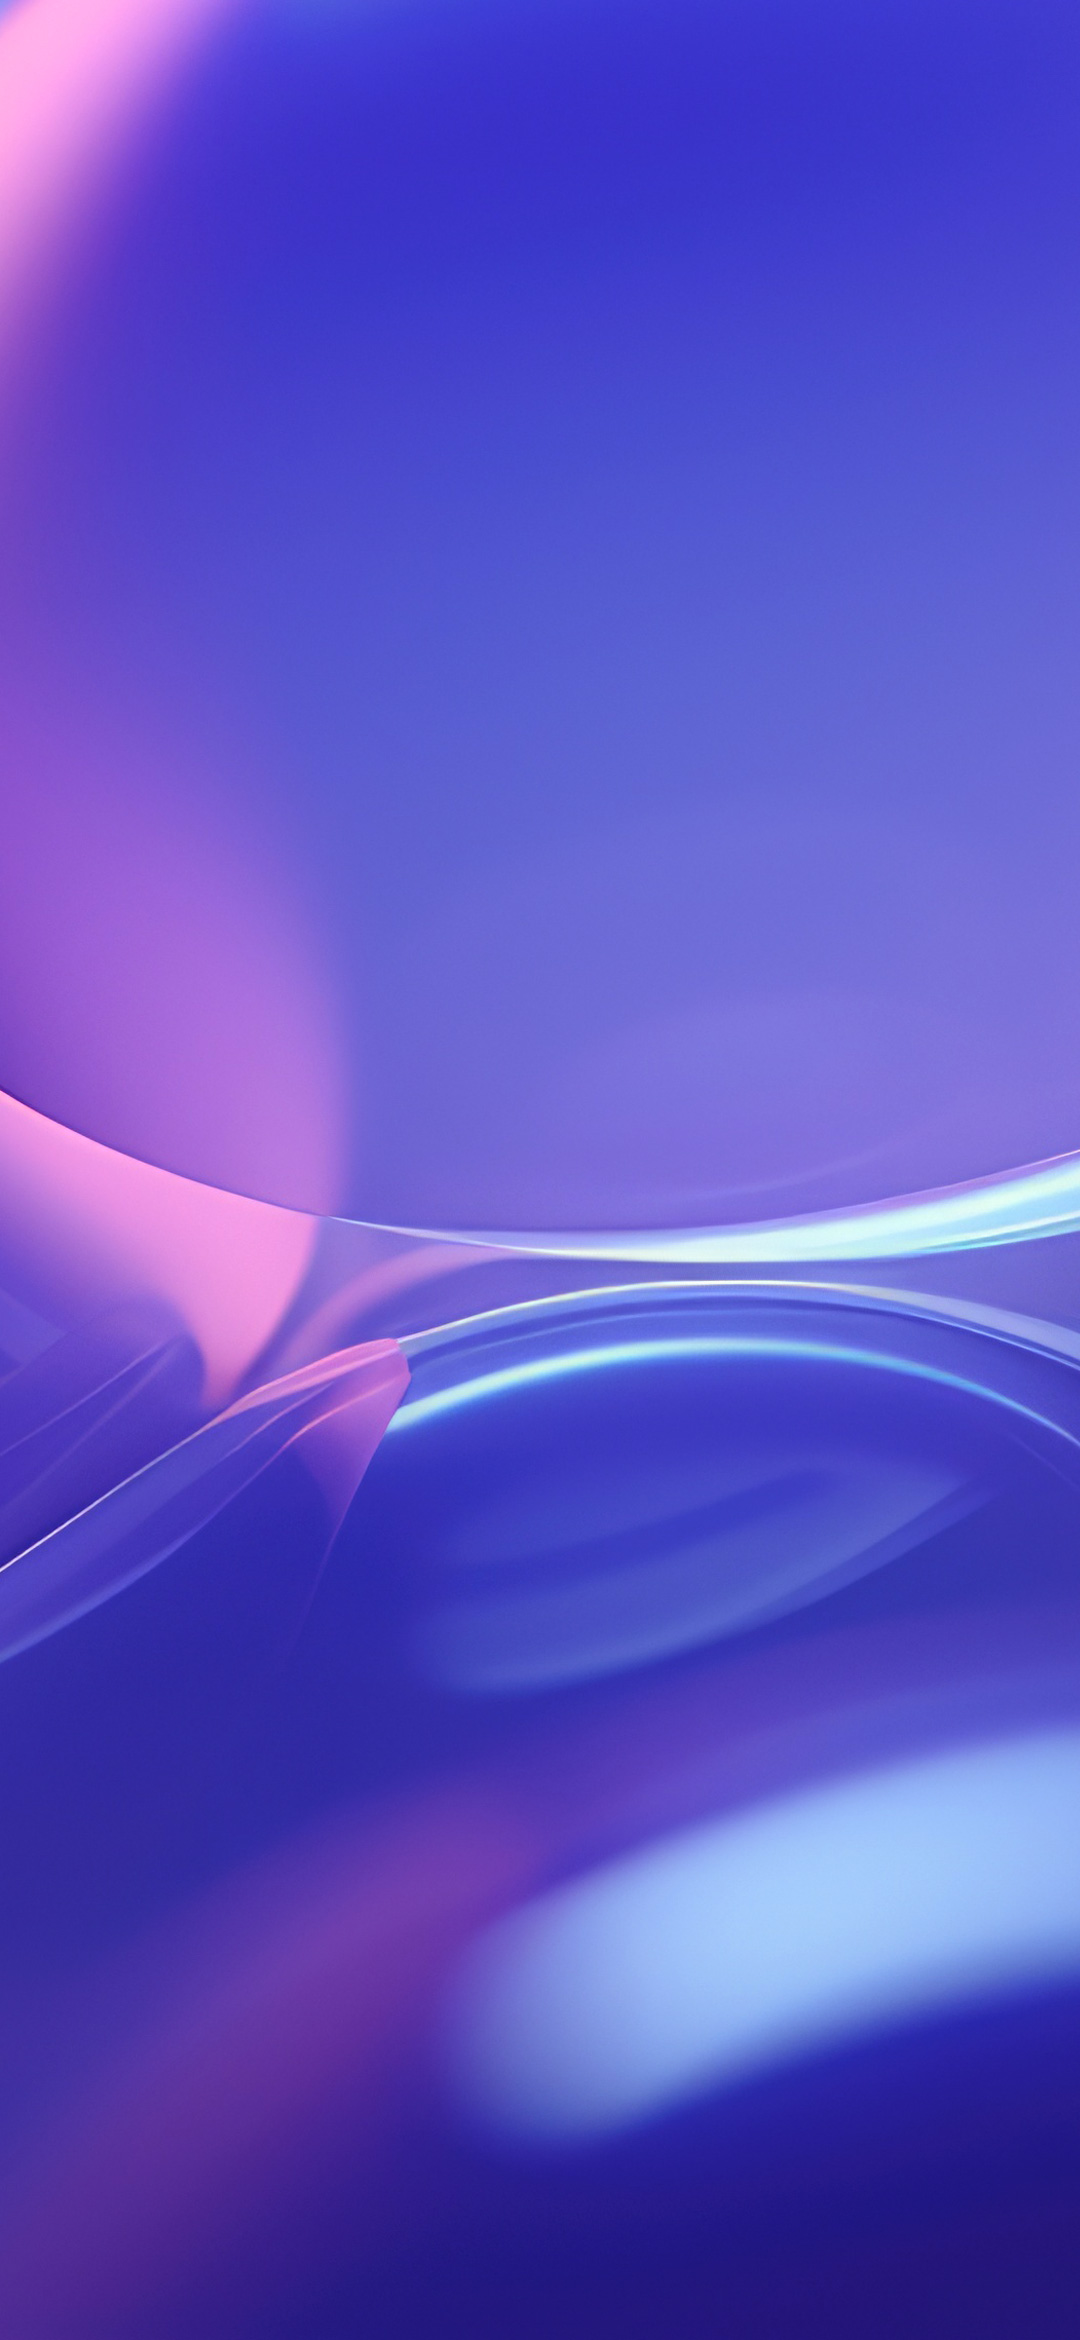 Abstract modern purple background